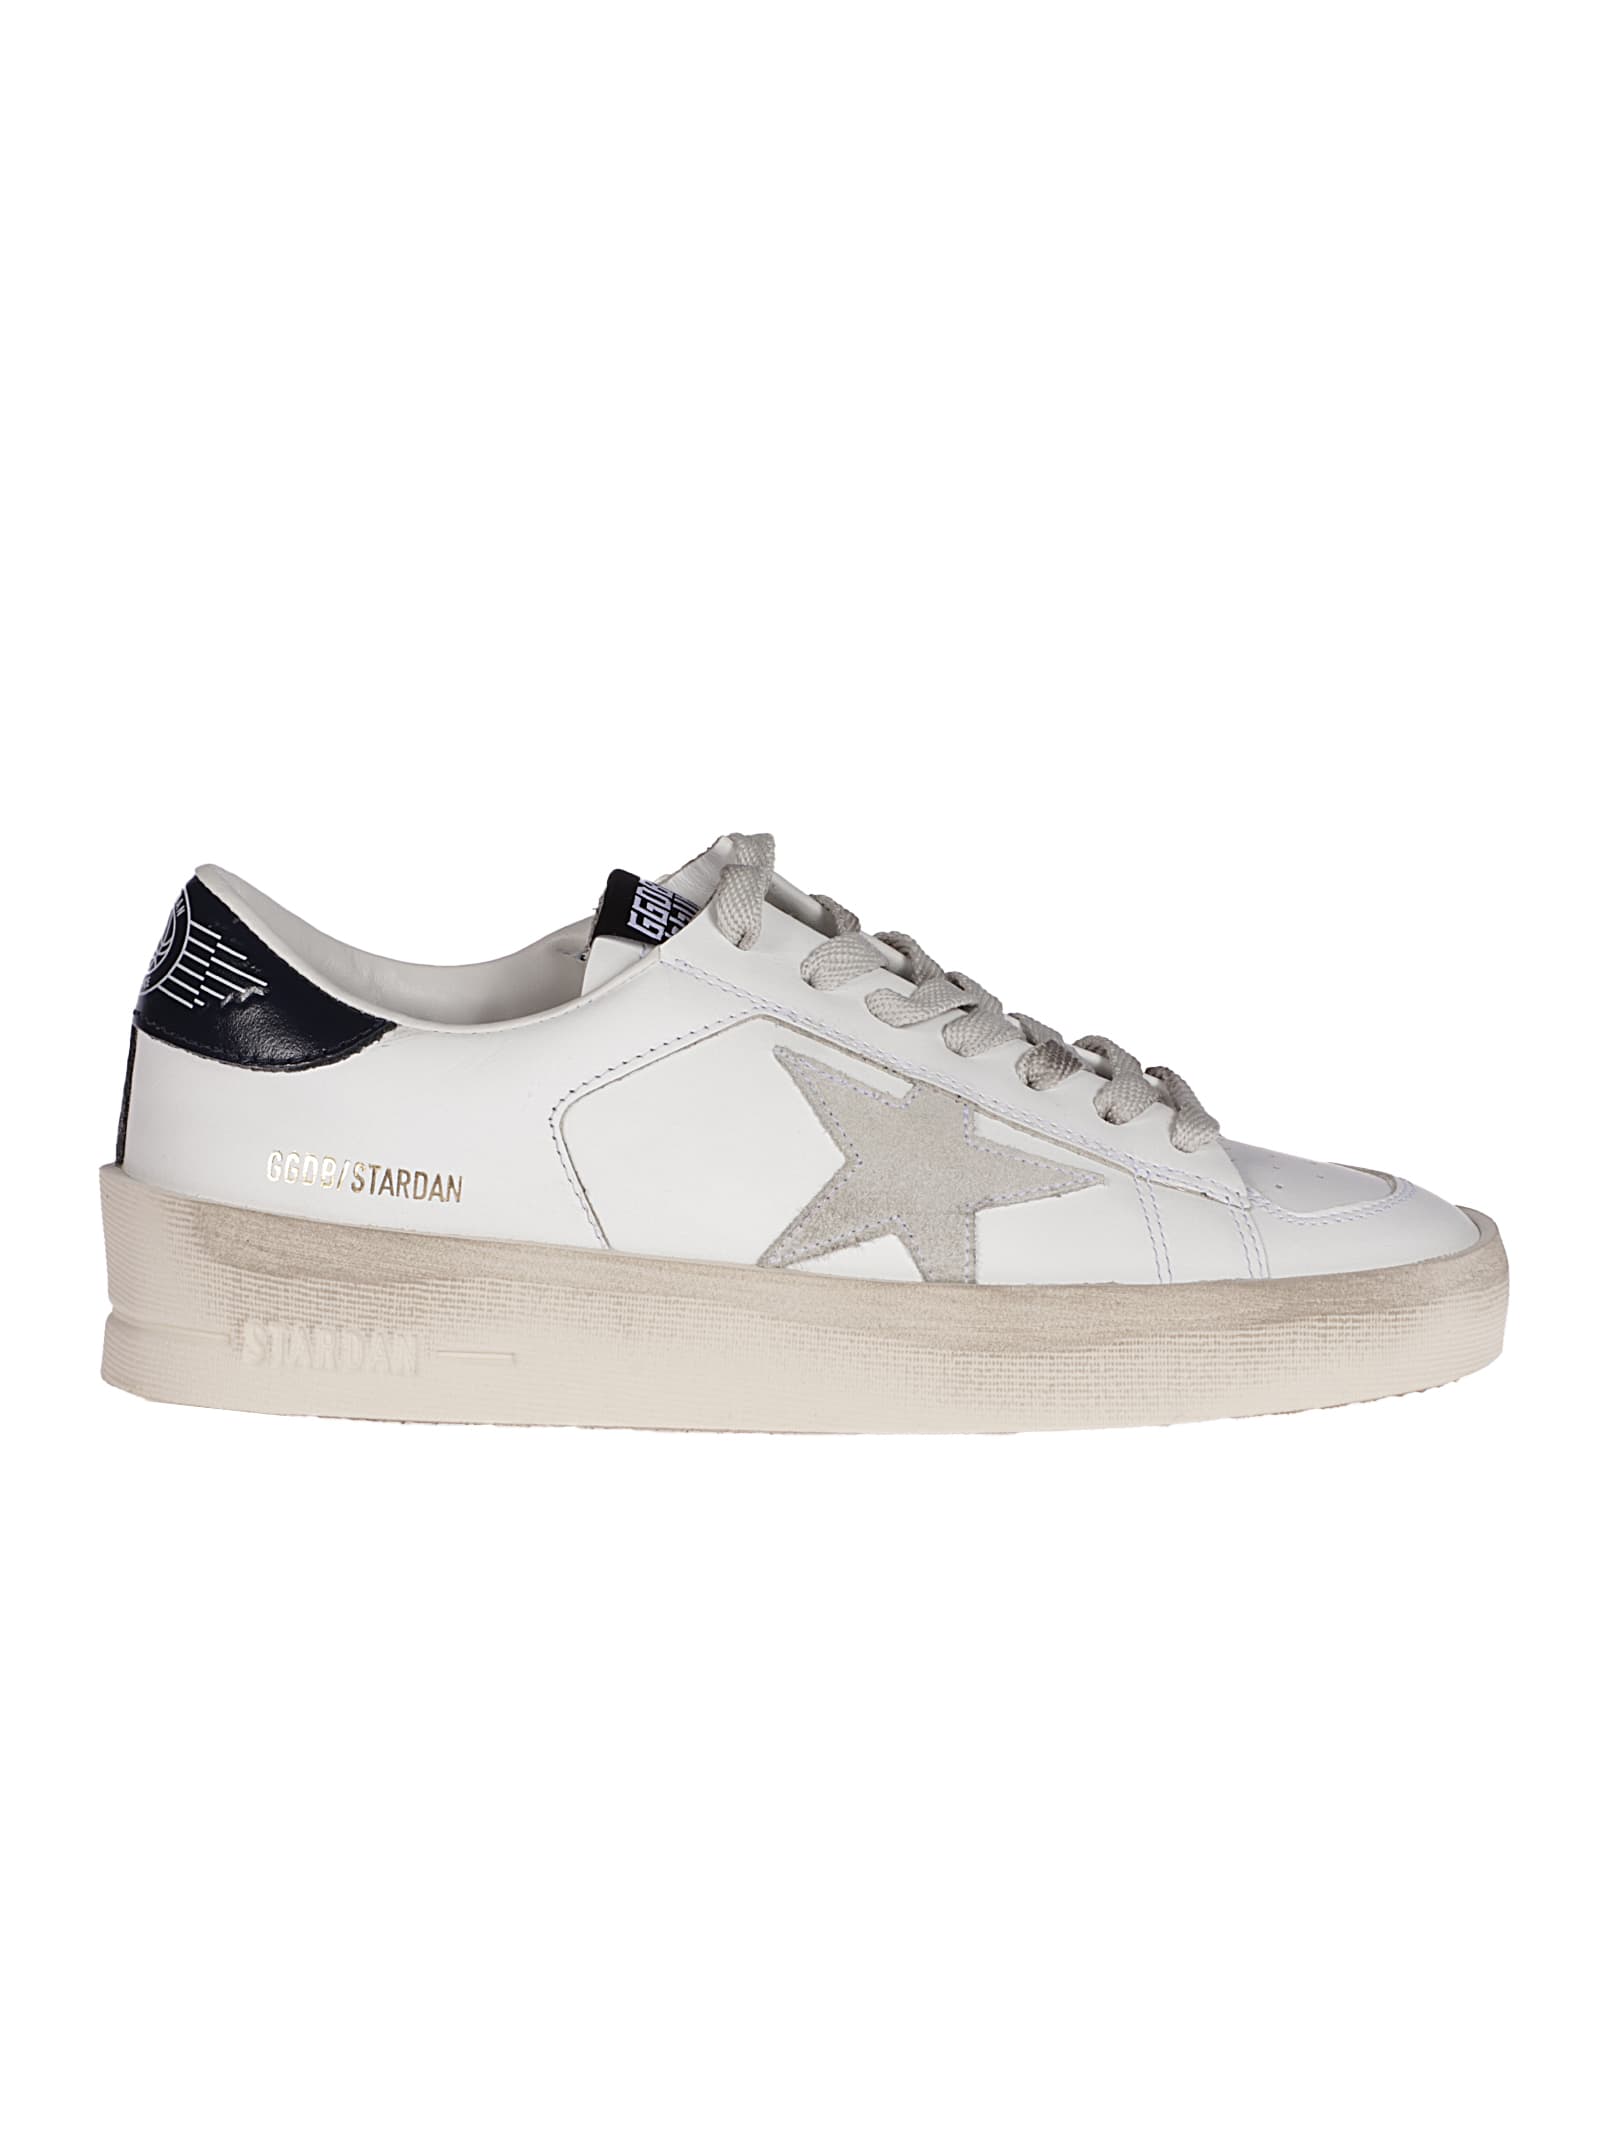 Golden Goose Stardan Leather Upper Suede Star Shuny Leather Hee